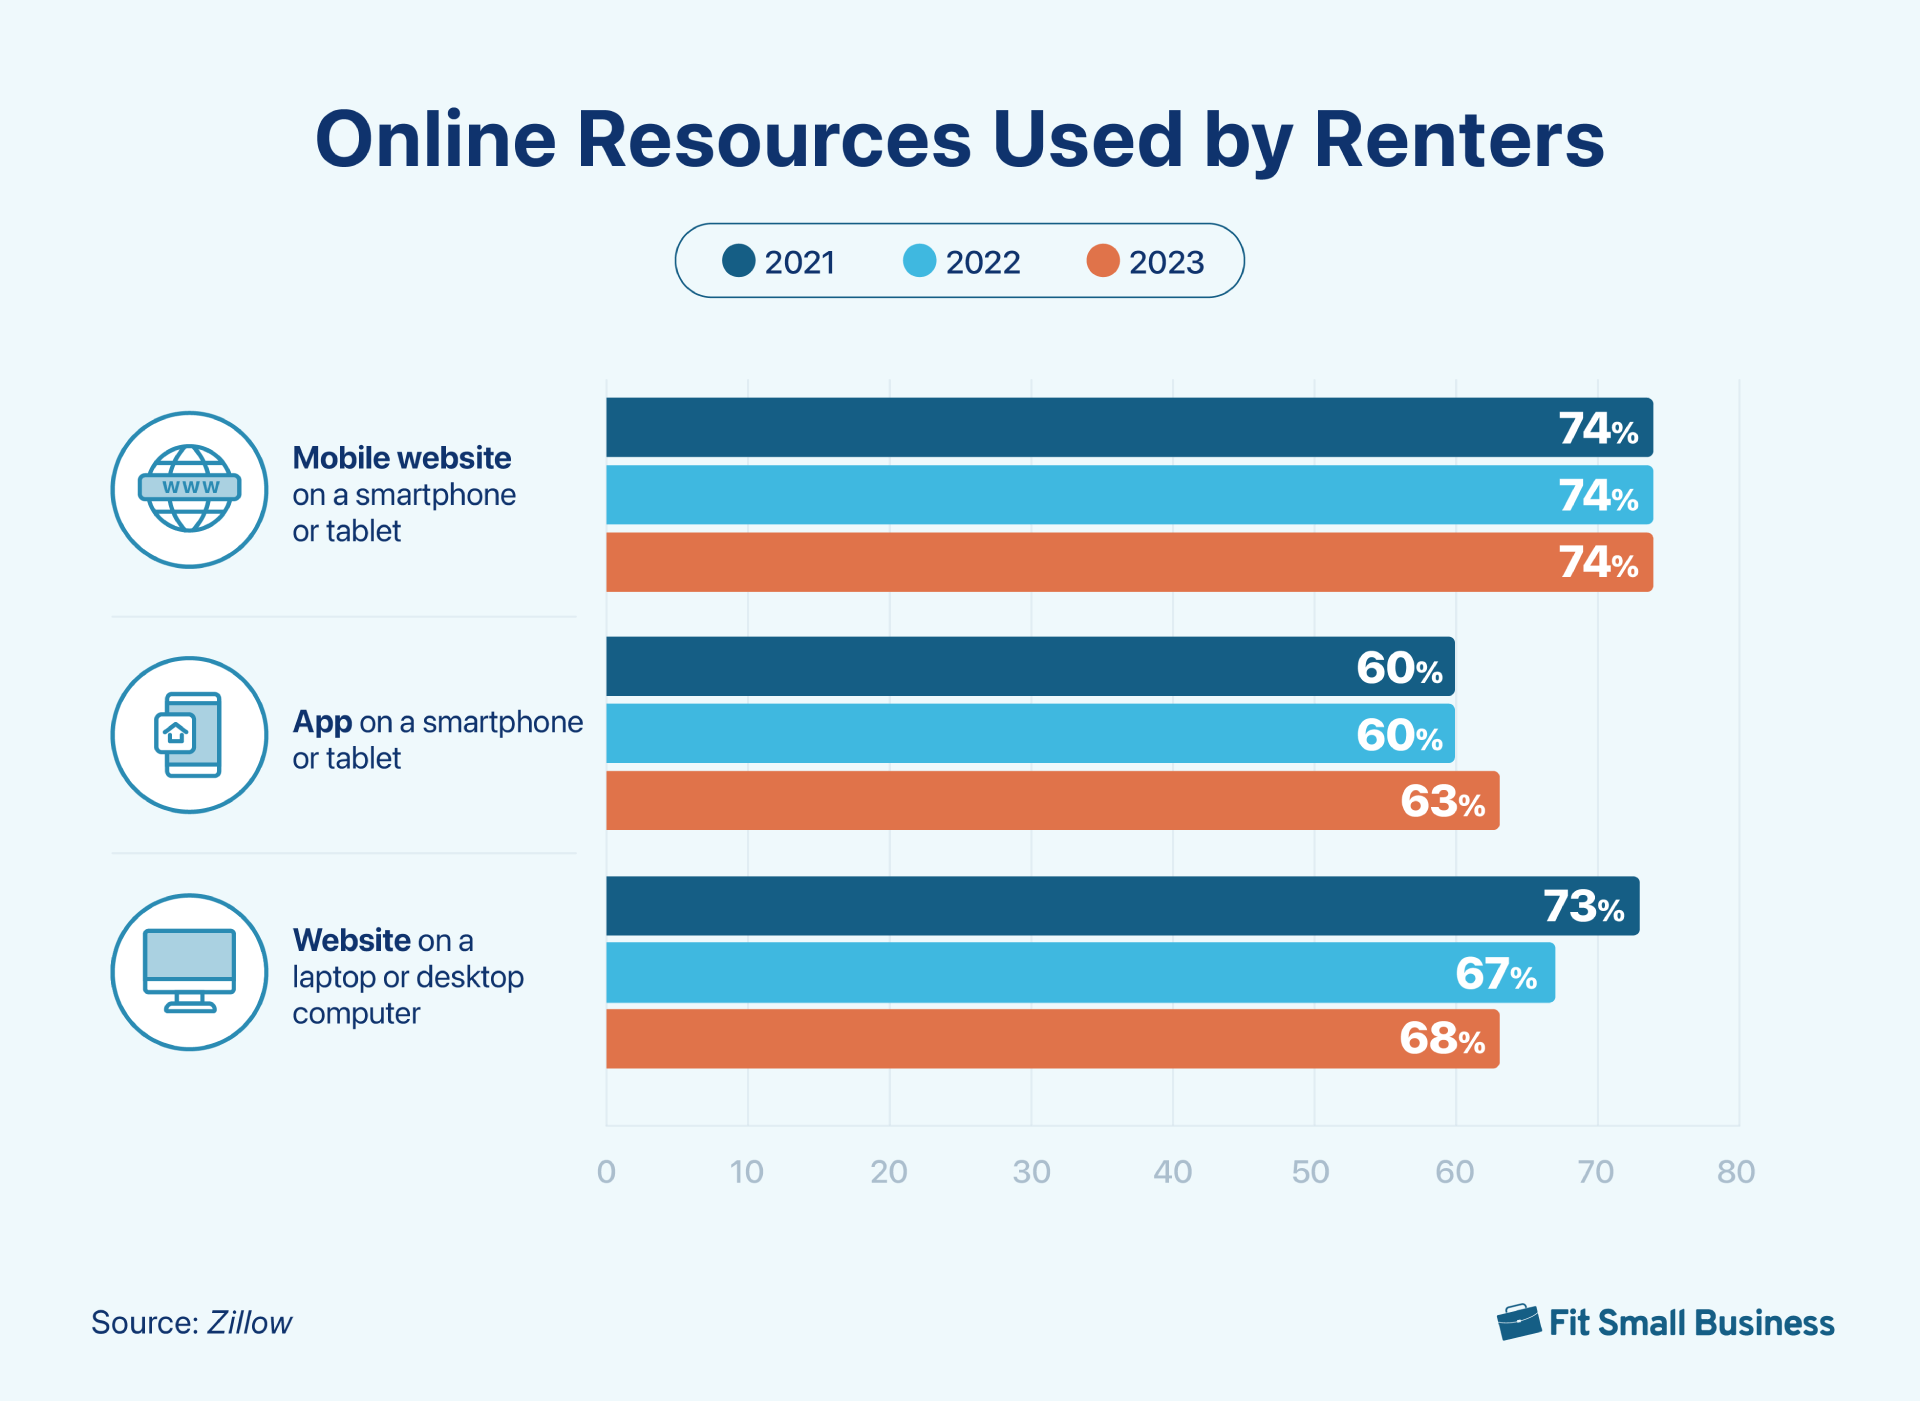 Graph of online resources used by renters by year 2021-2023